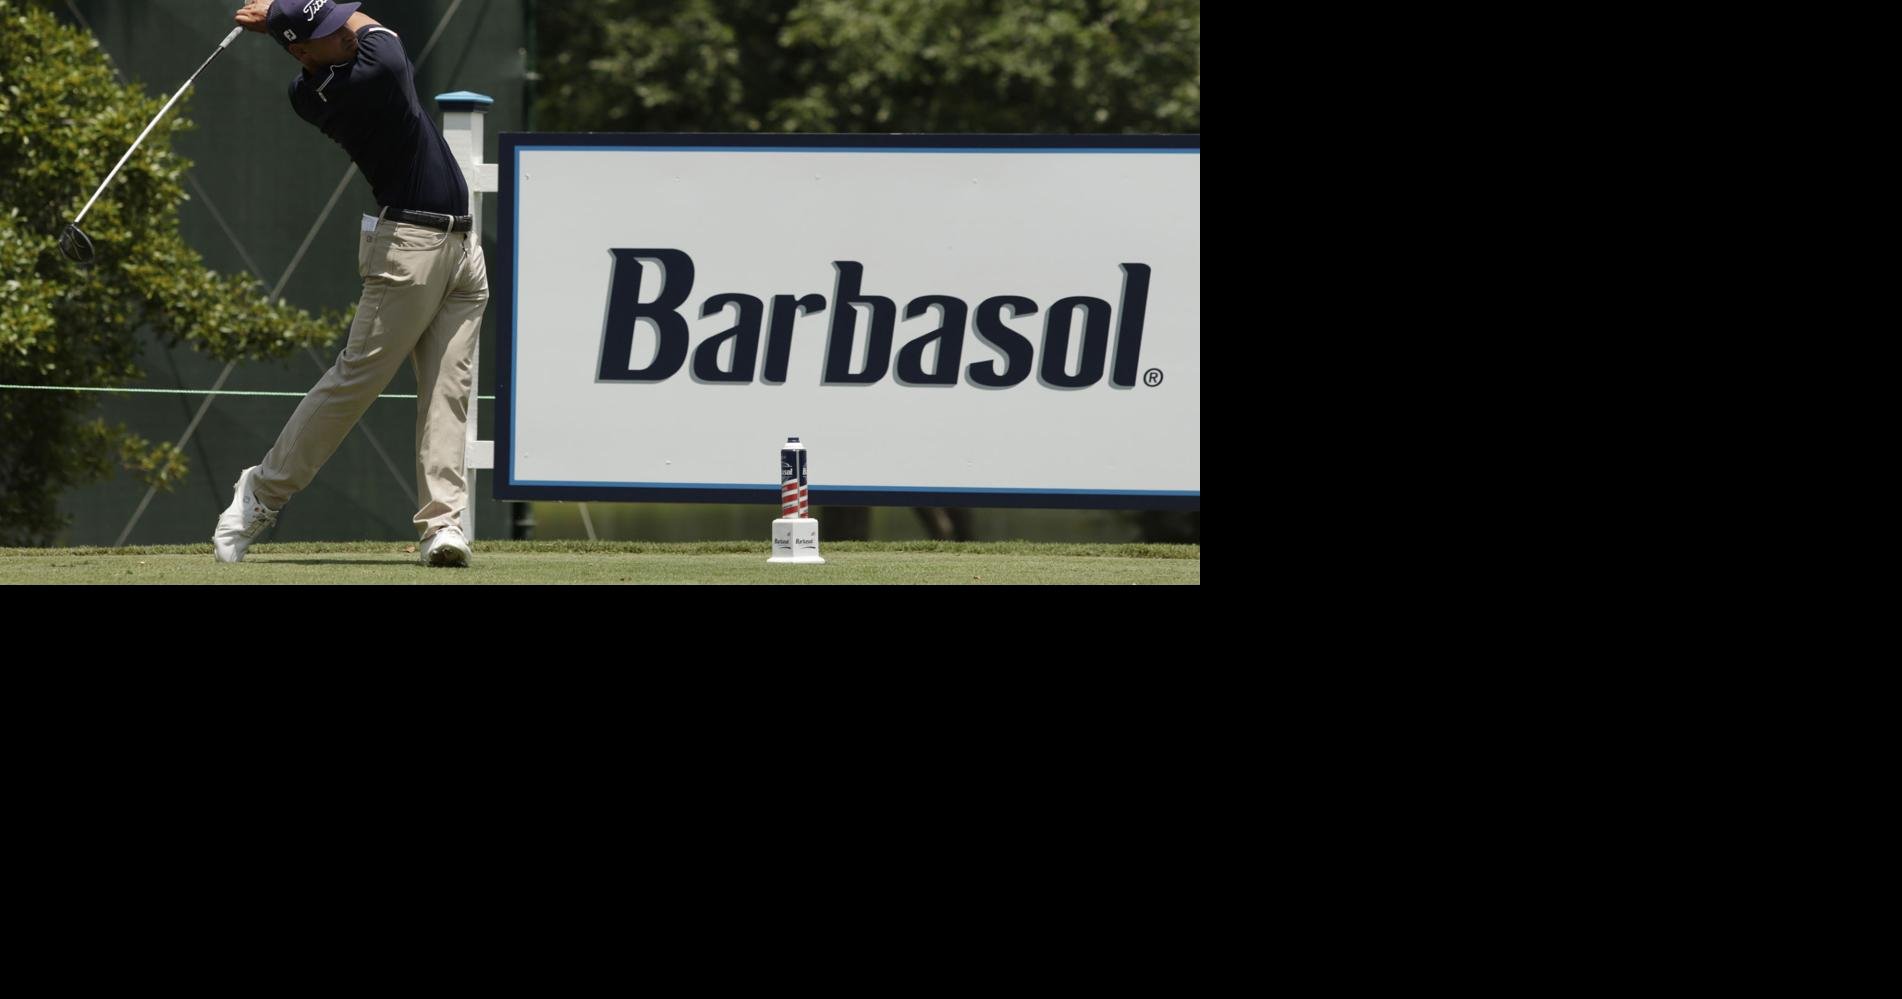 Tee Times for Round 1 of Barbasol Championship